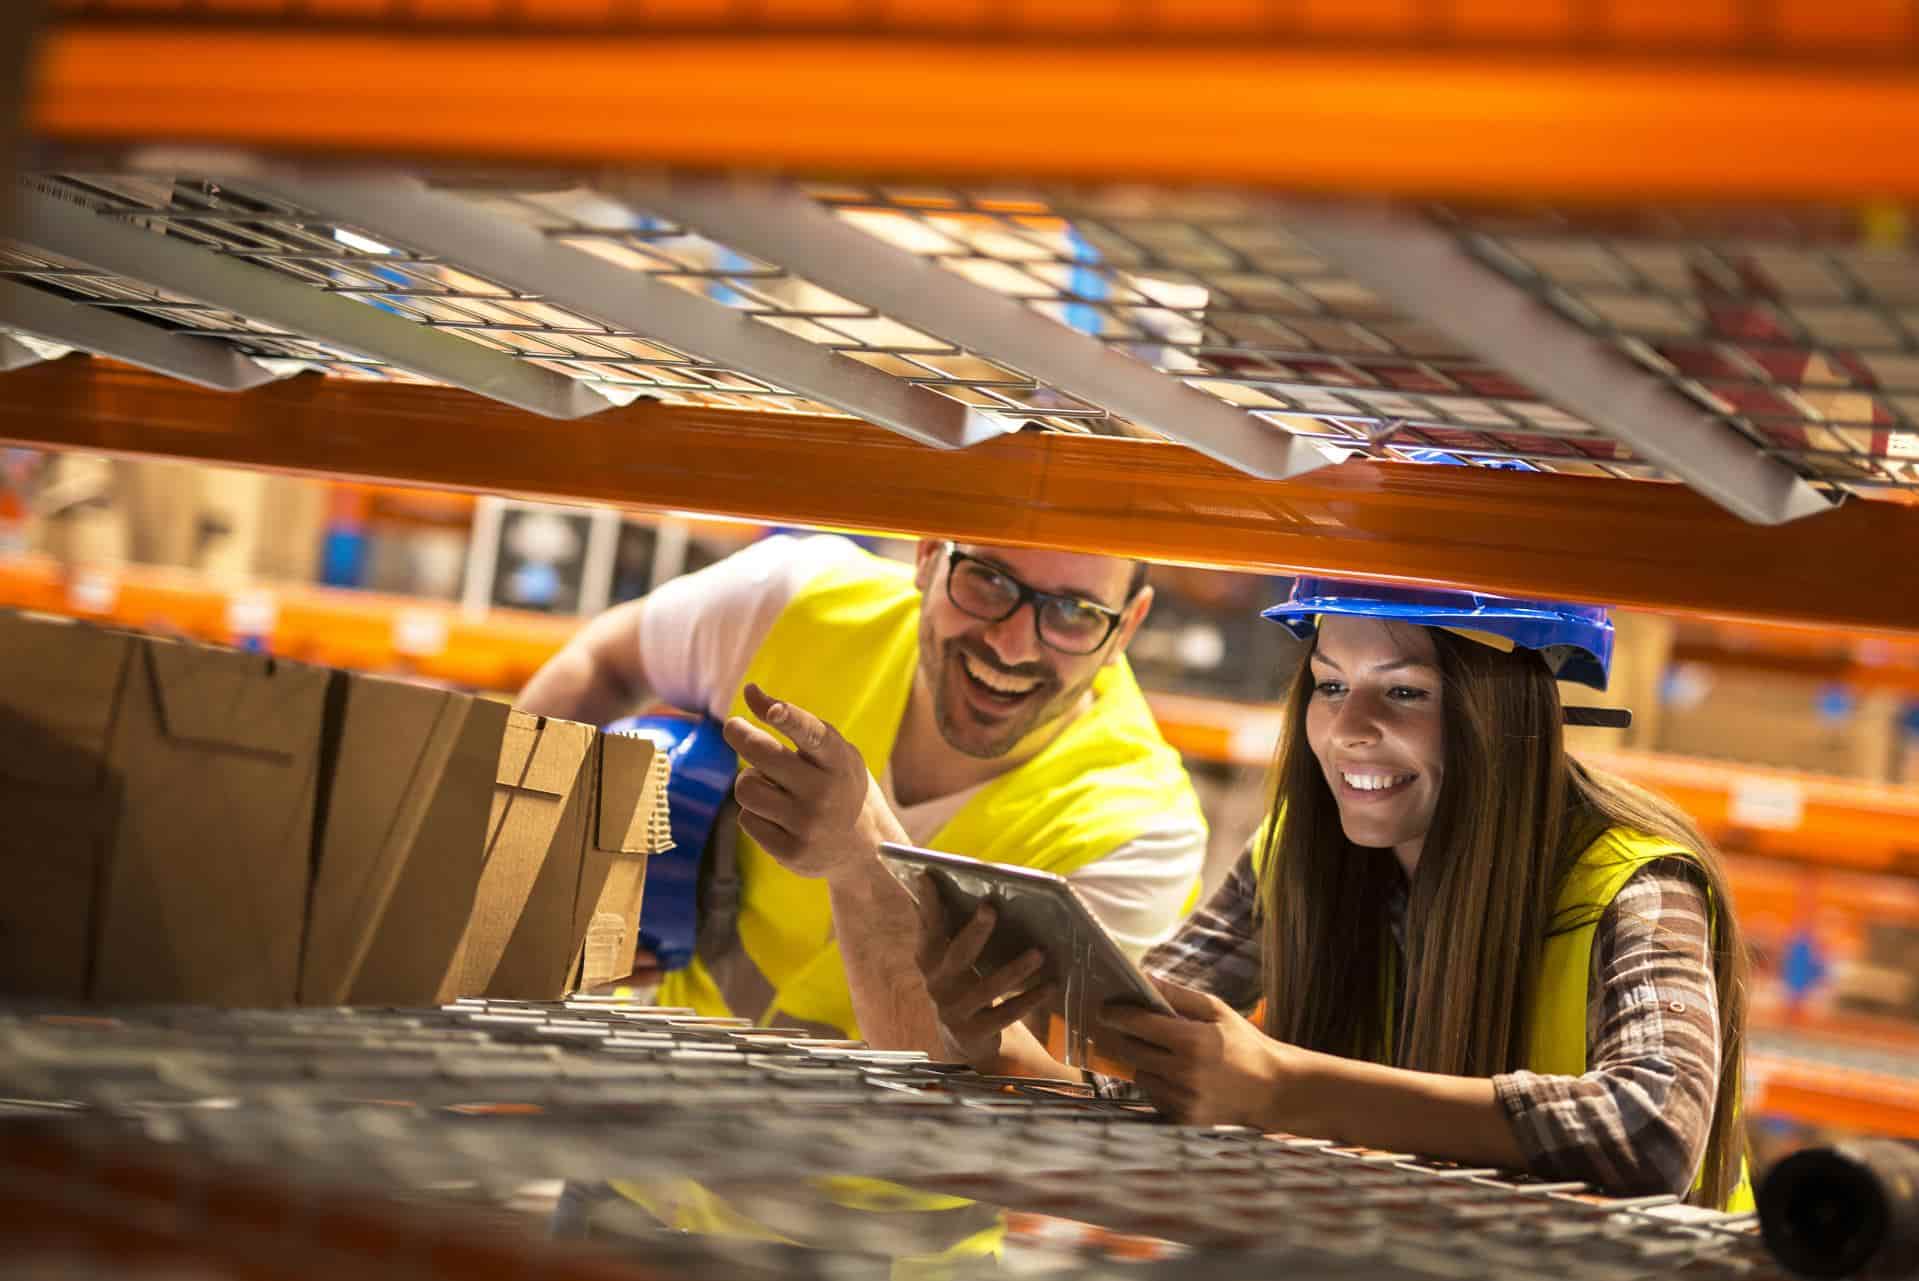 Supply Chain Resilience: Challenges in Amazon Fulfillment